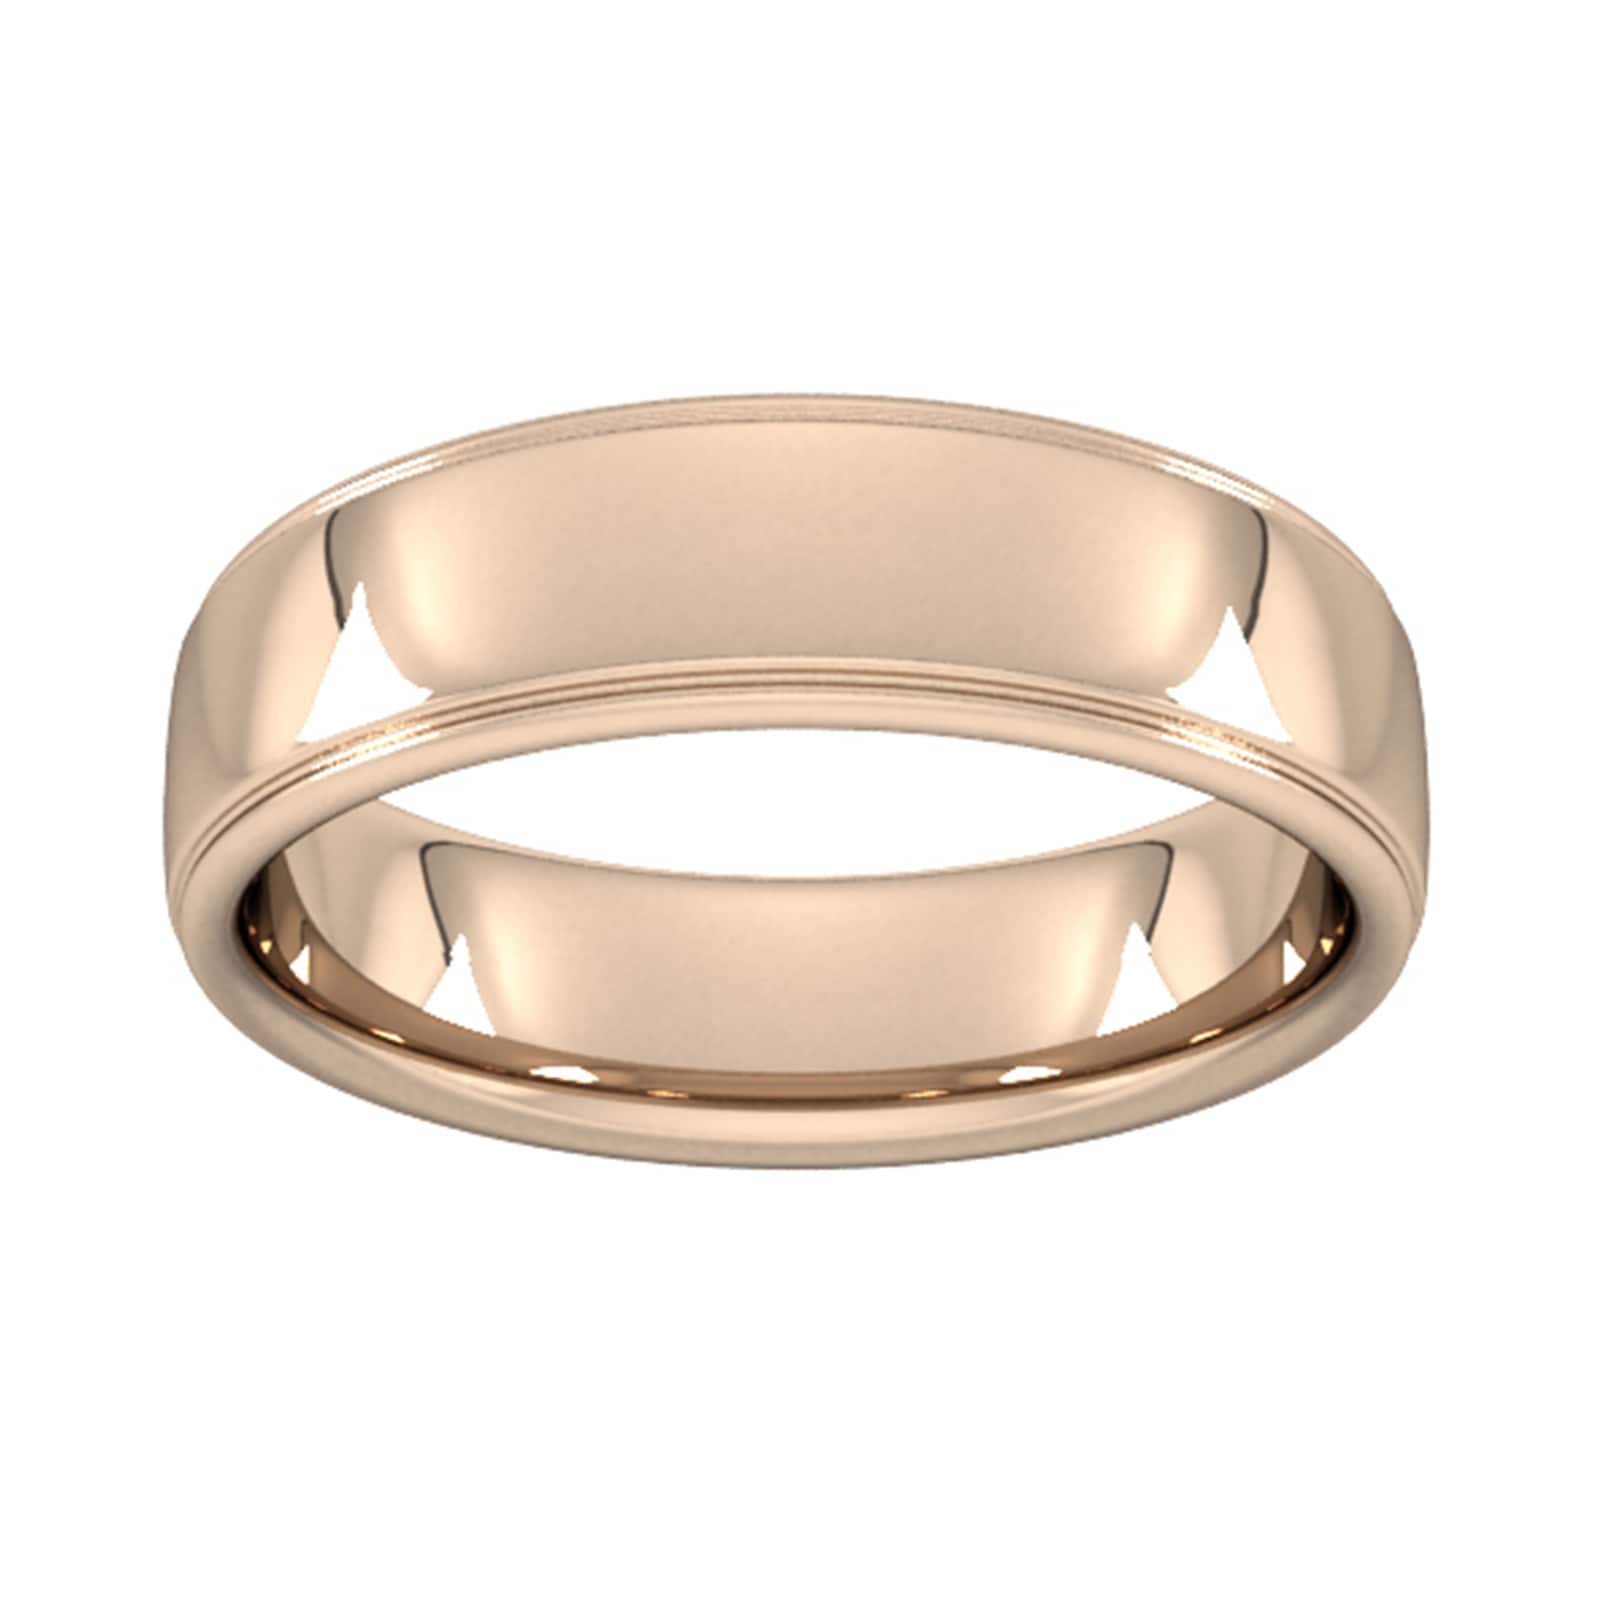 6mm Slight Court Extra Heavy Polished Finish With Grooves Wedding Ring In 18 Carat Rose Gold - Ring Size V